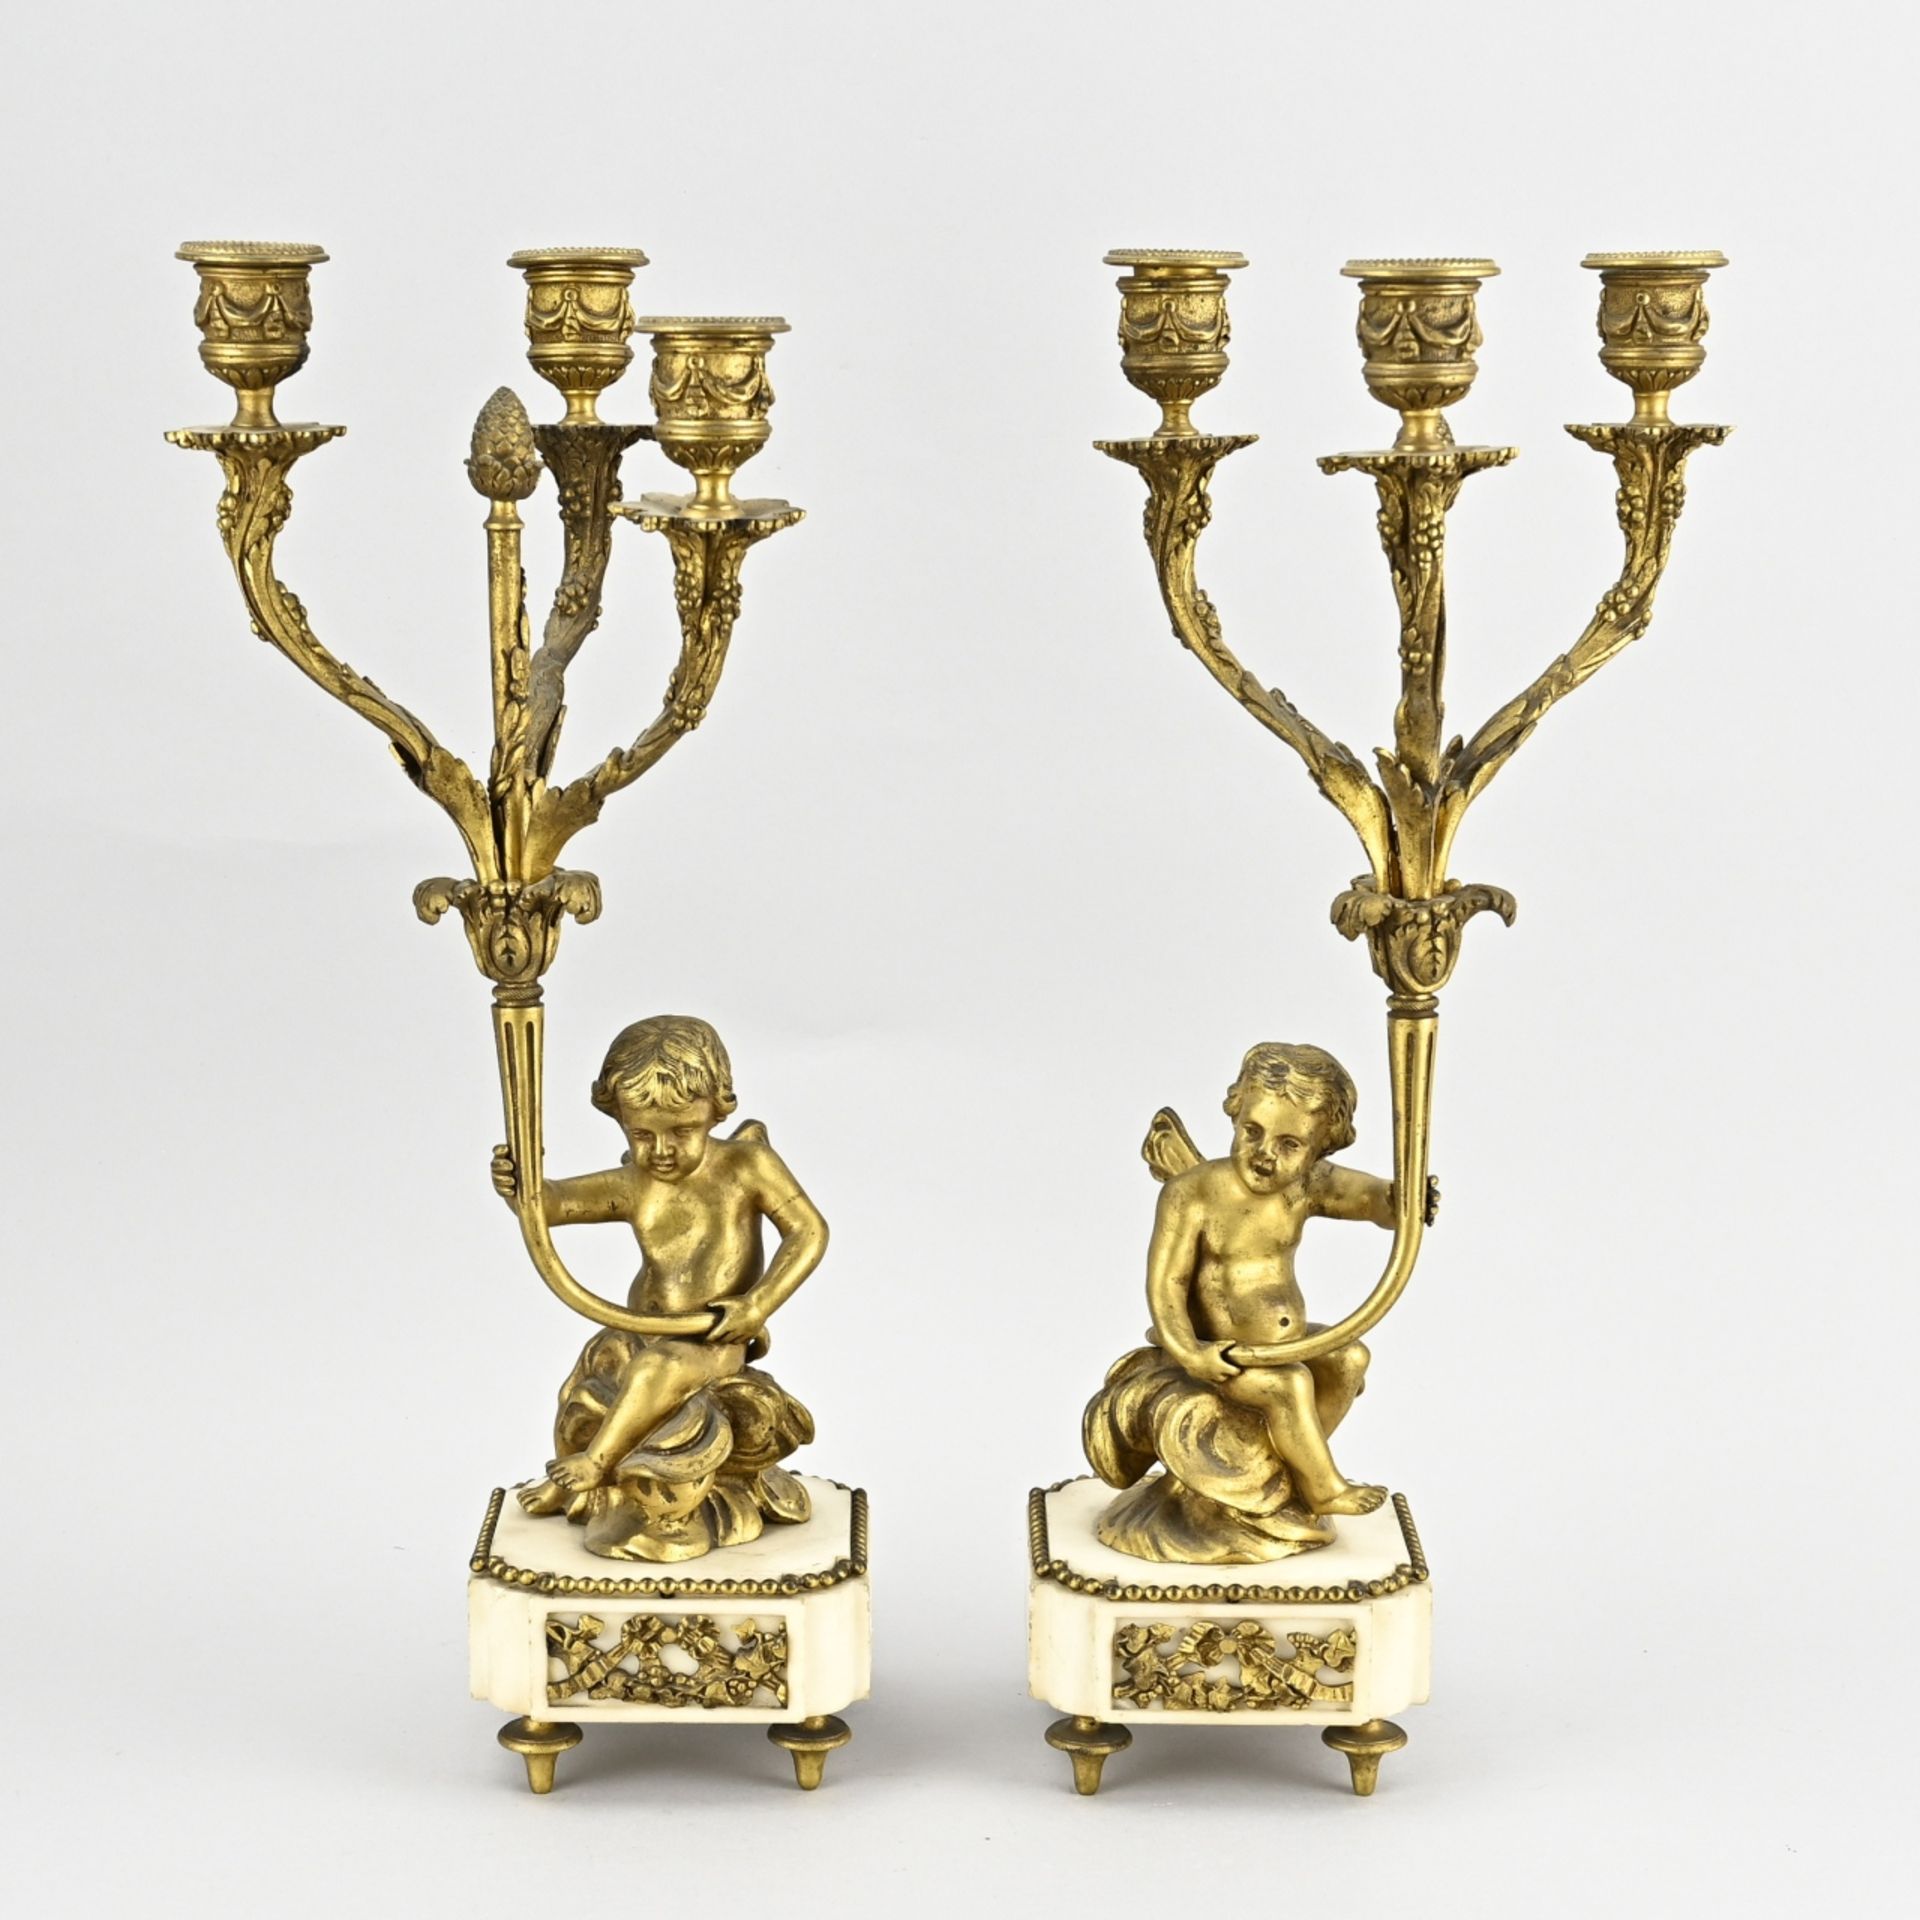 2x French candle holder, H 43 cm.